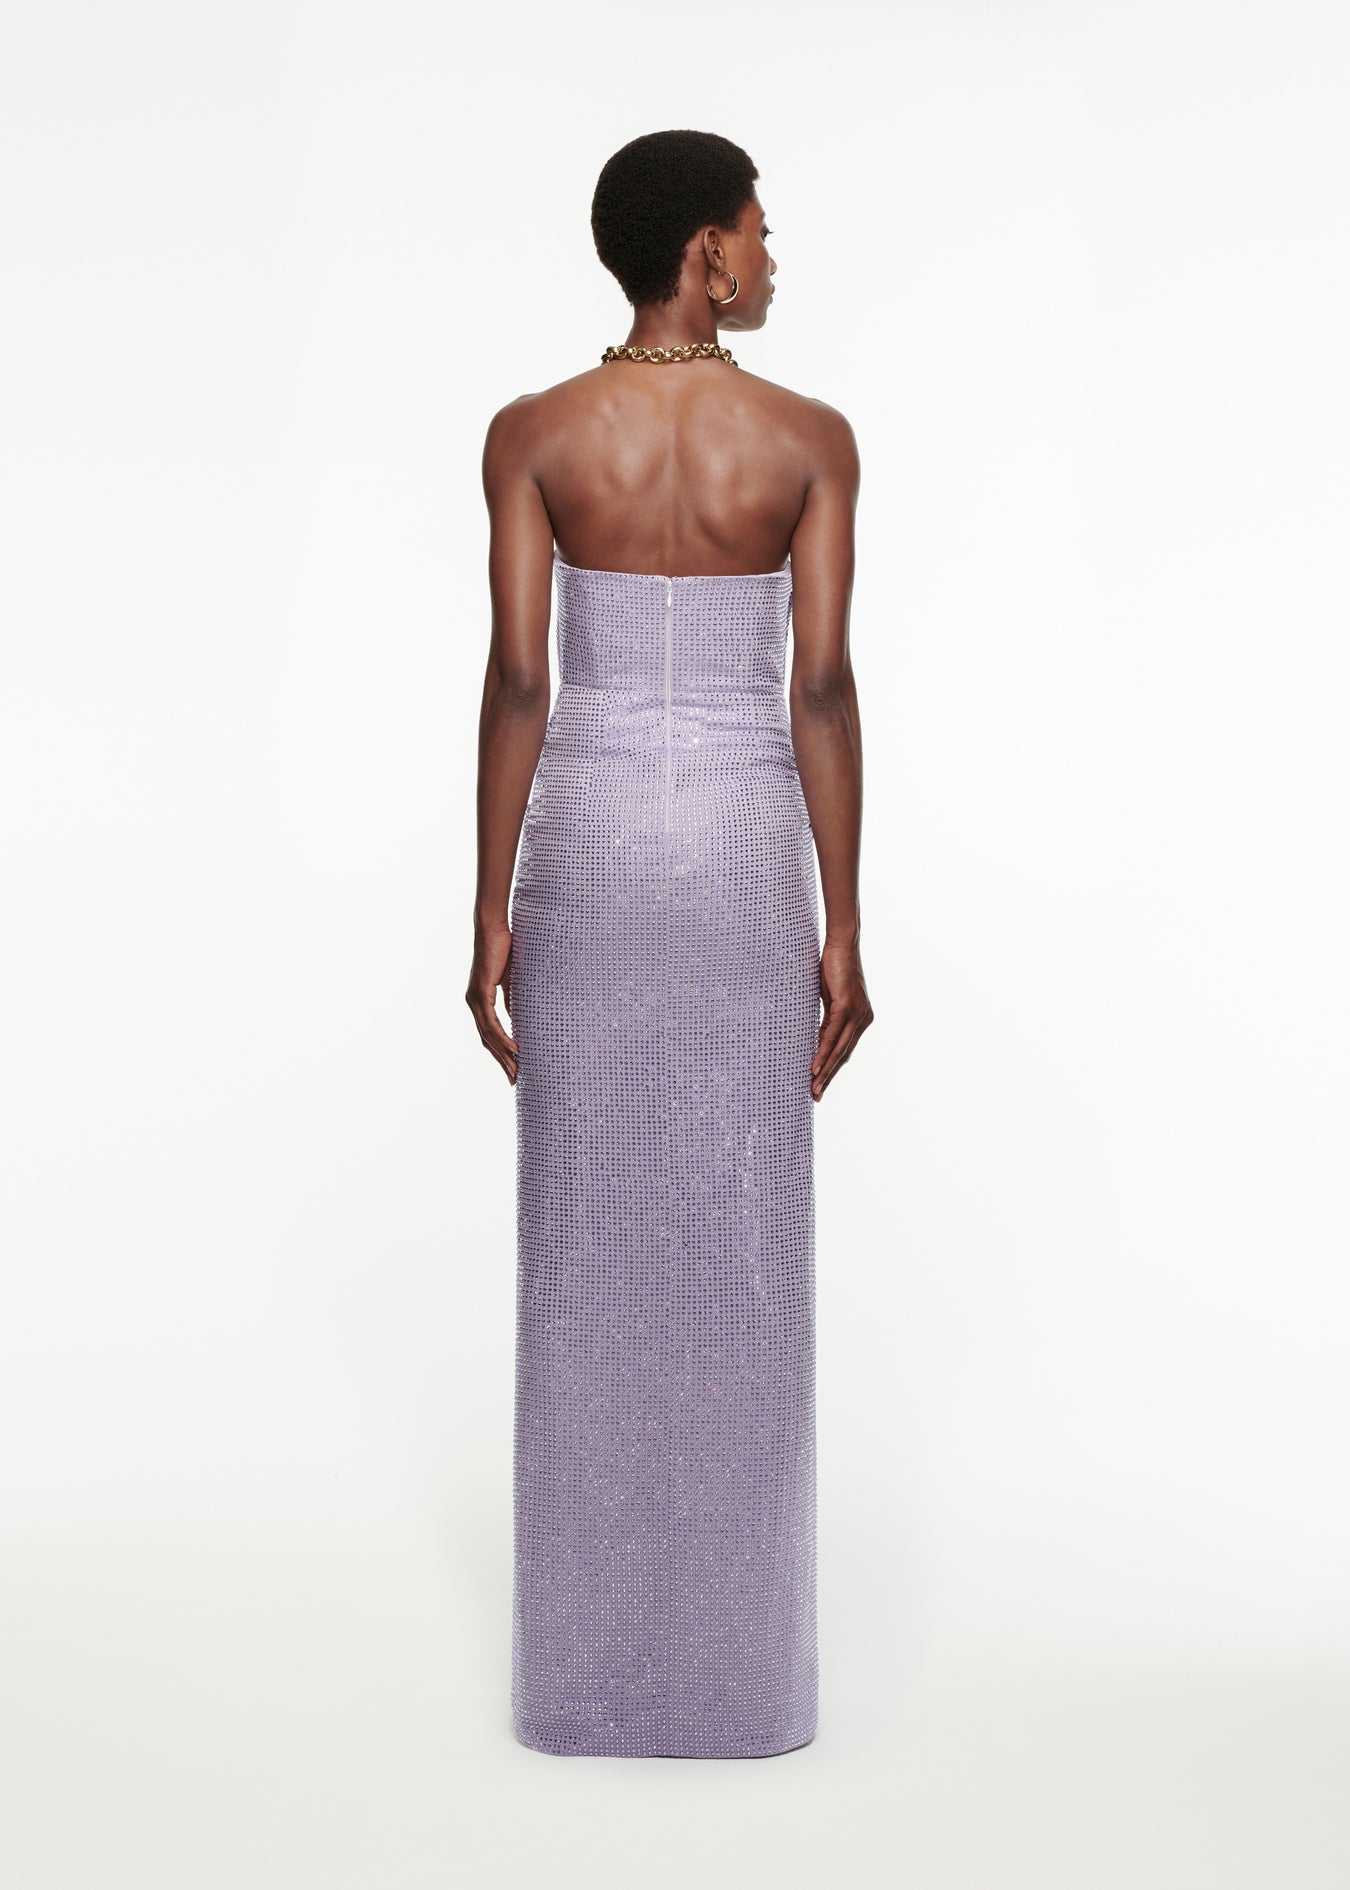 The back of a woman wearing the Asymmetric Diamanté Gown in Lilac